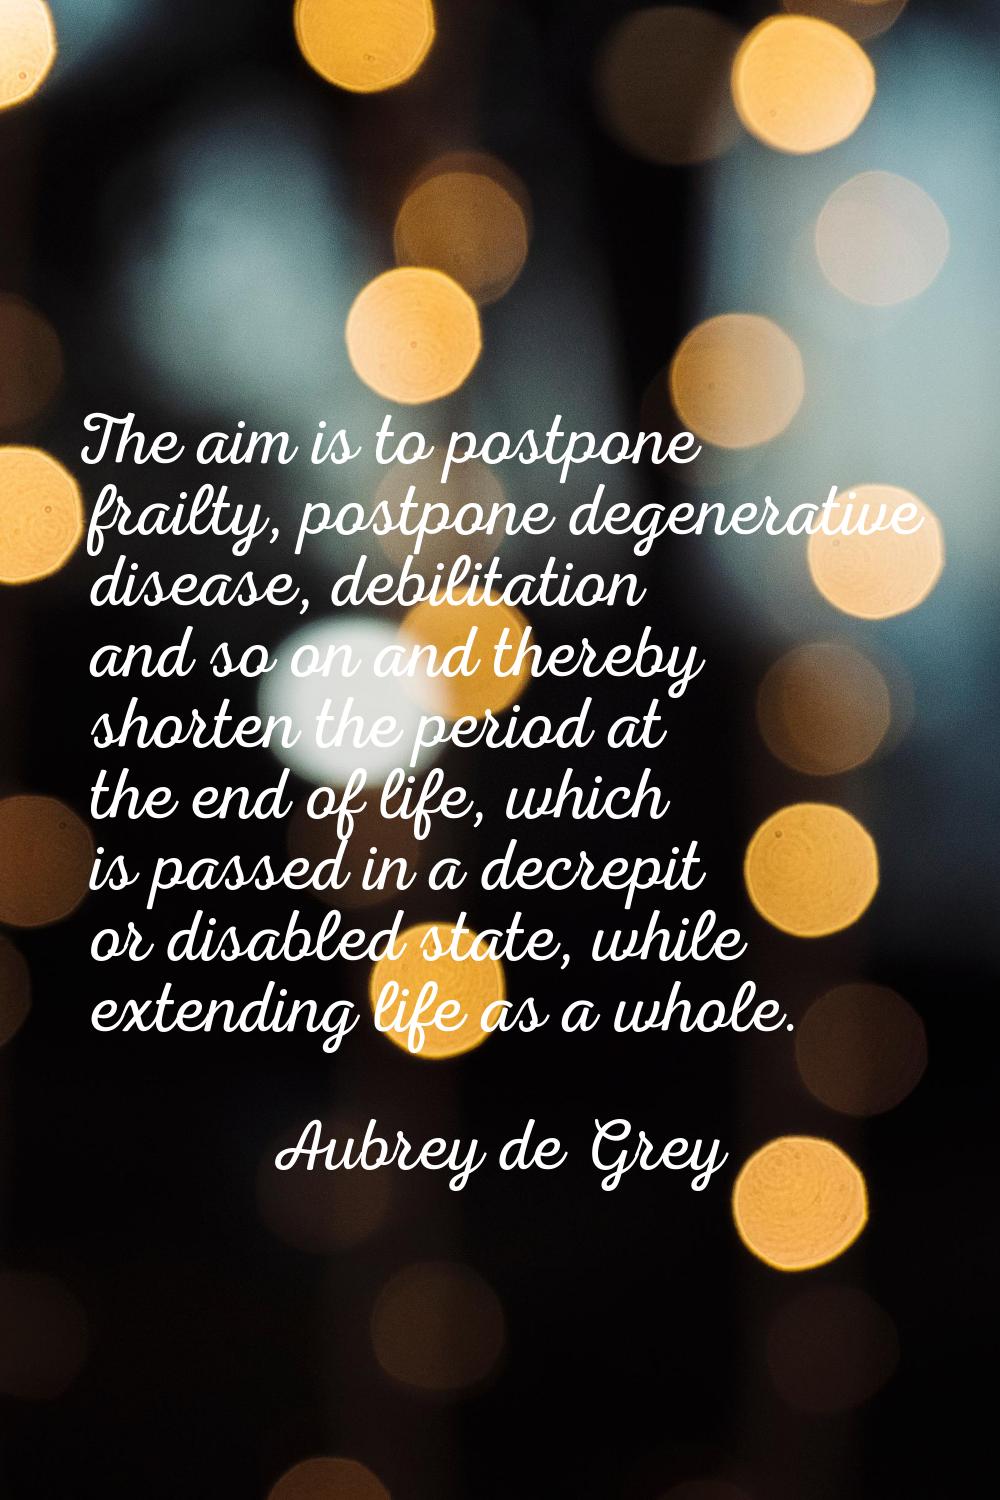 The aim is to postpone frailty, postpone degenerative disease, debilitation and so on and thereby s